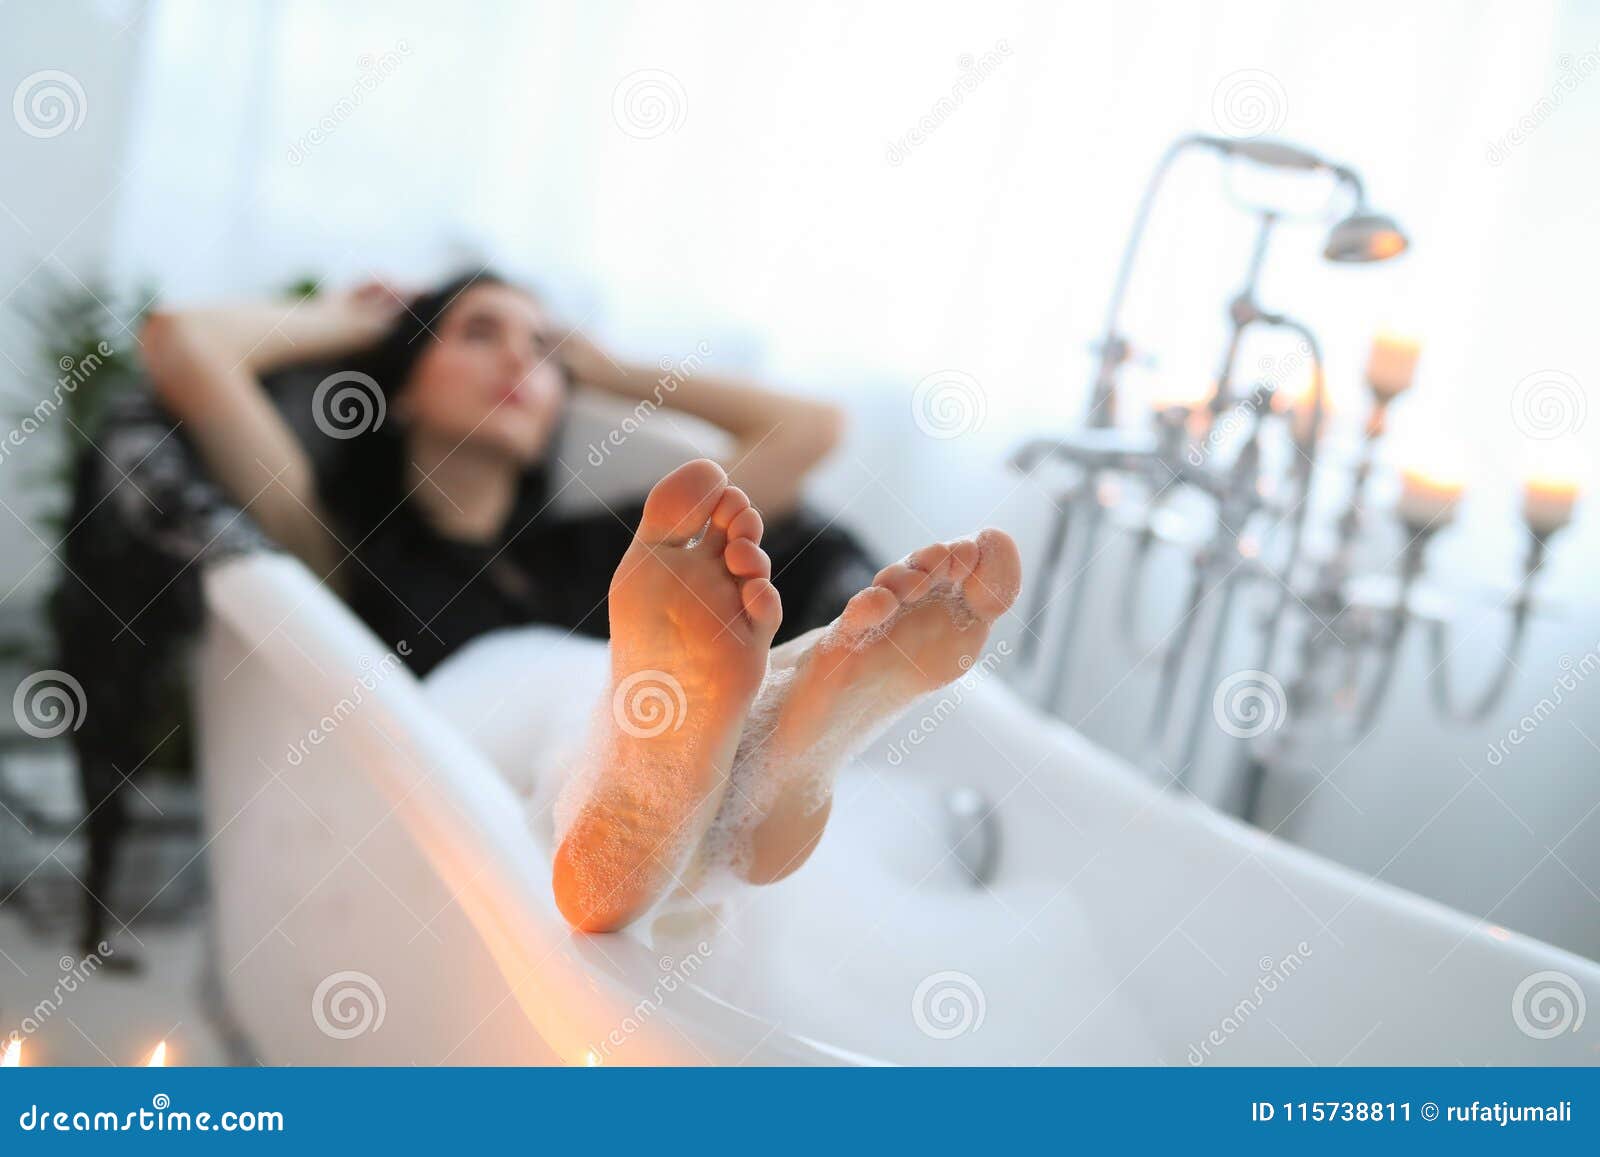 1,597 Young Woman Relaxing Taking Bath Stock Photos - Free & Royalty-Free  Stock Photos from Dreamstime - Page 17